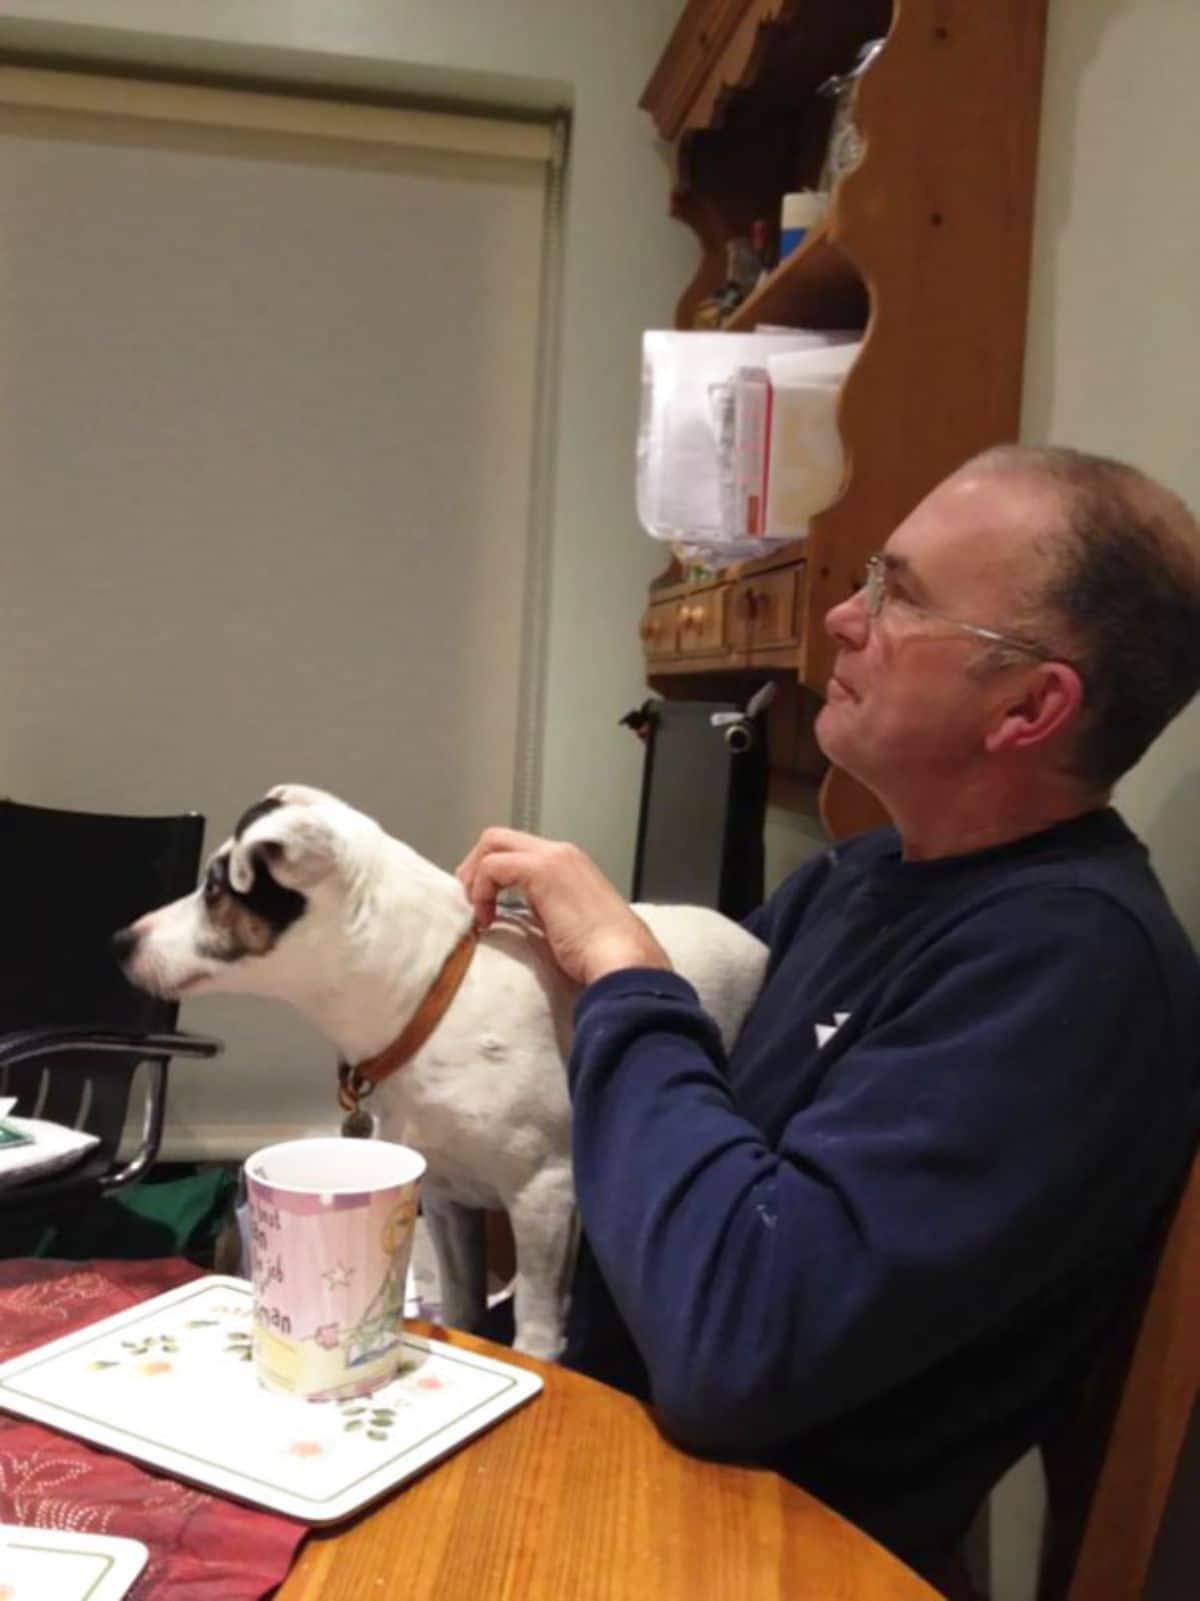 white and black dog standing on a man's lap